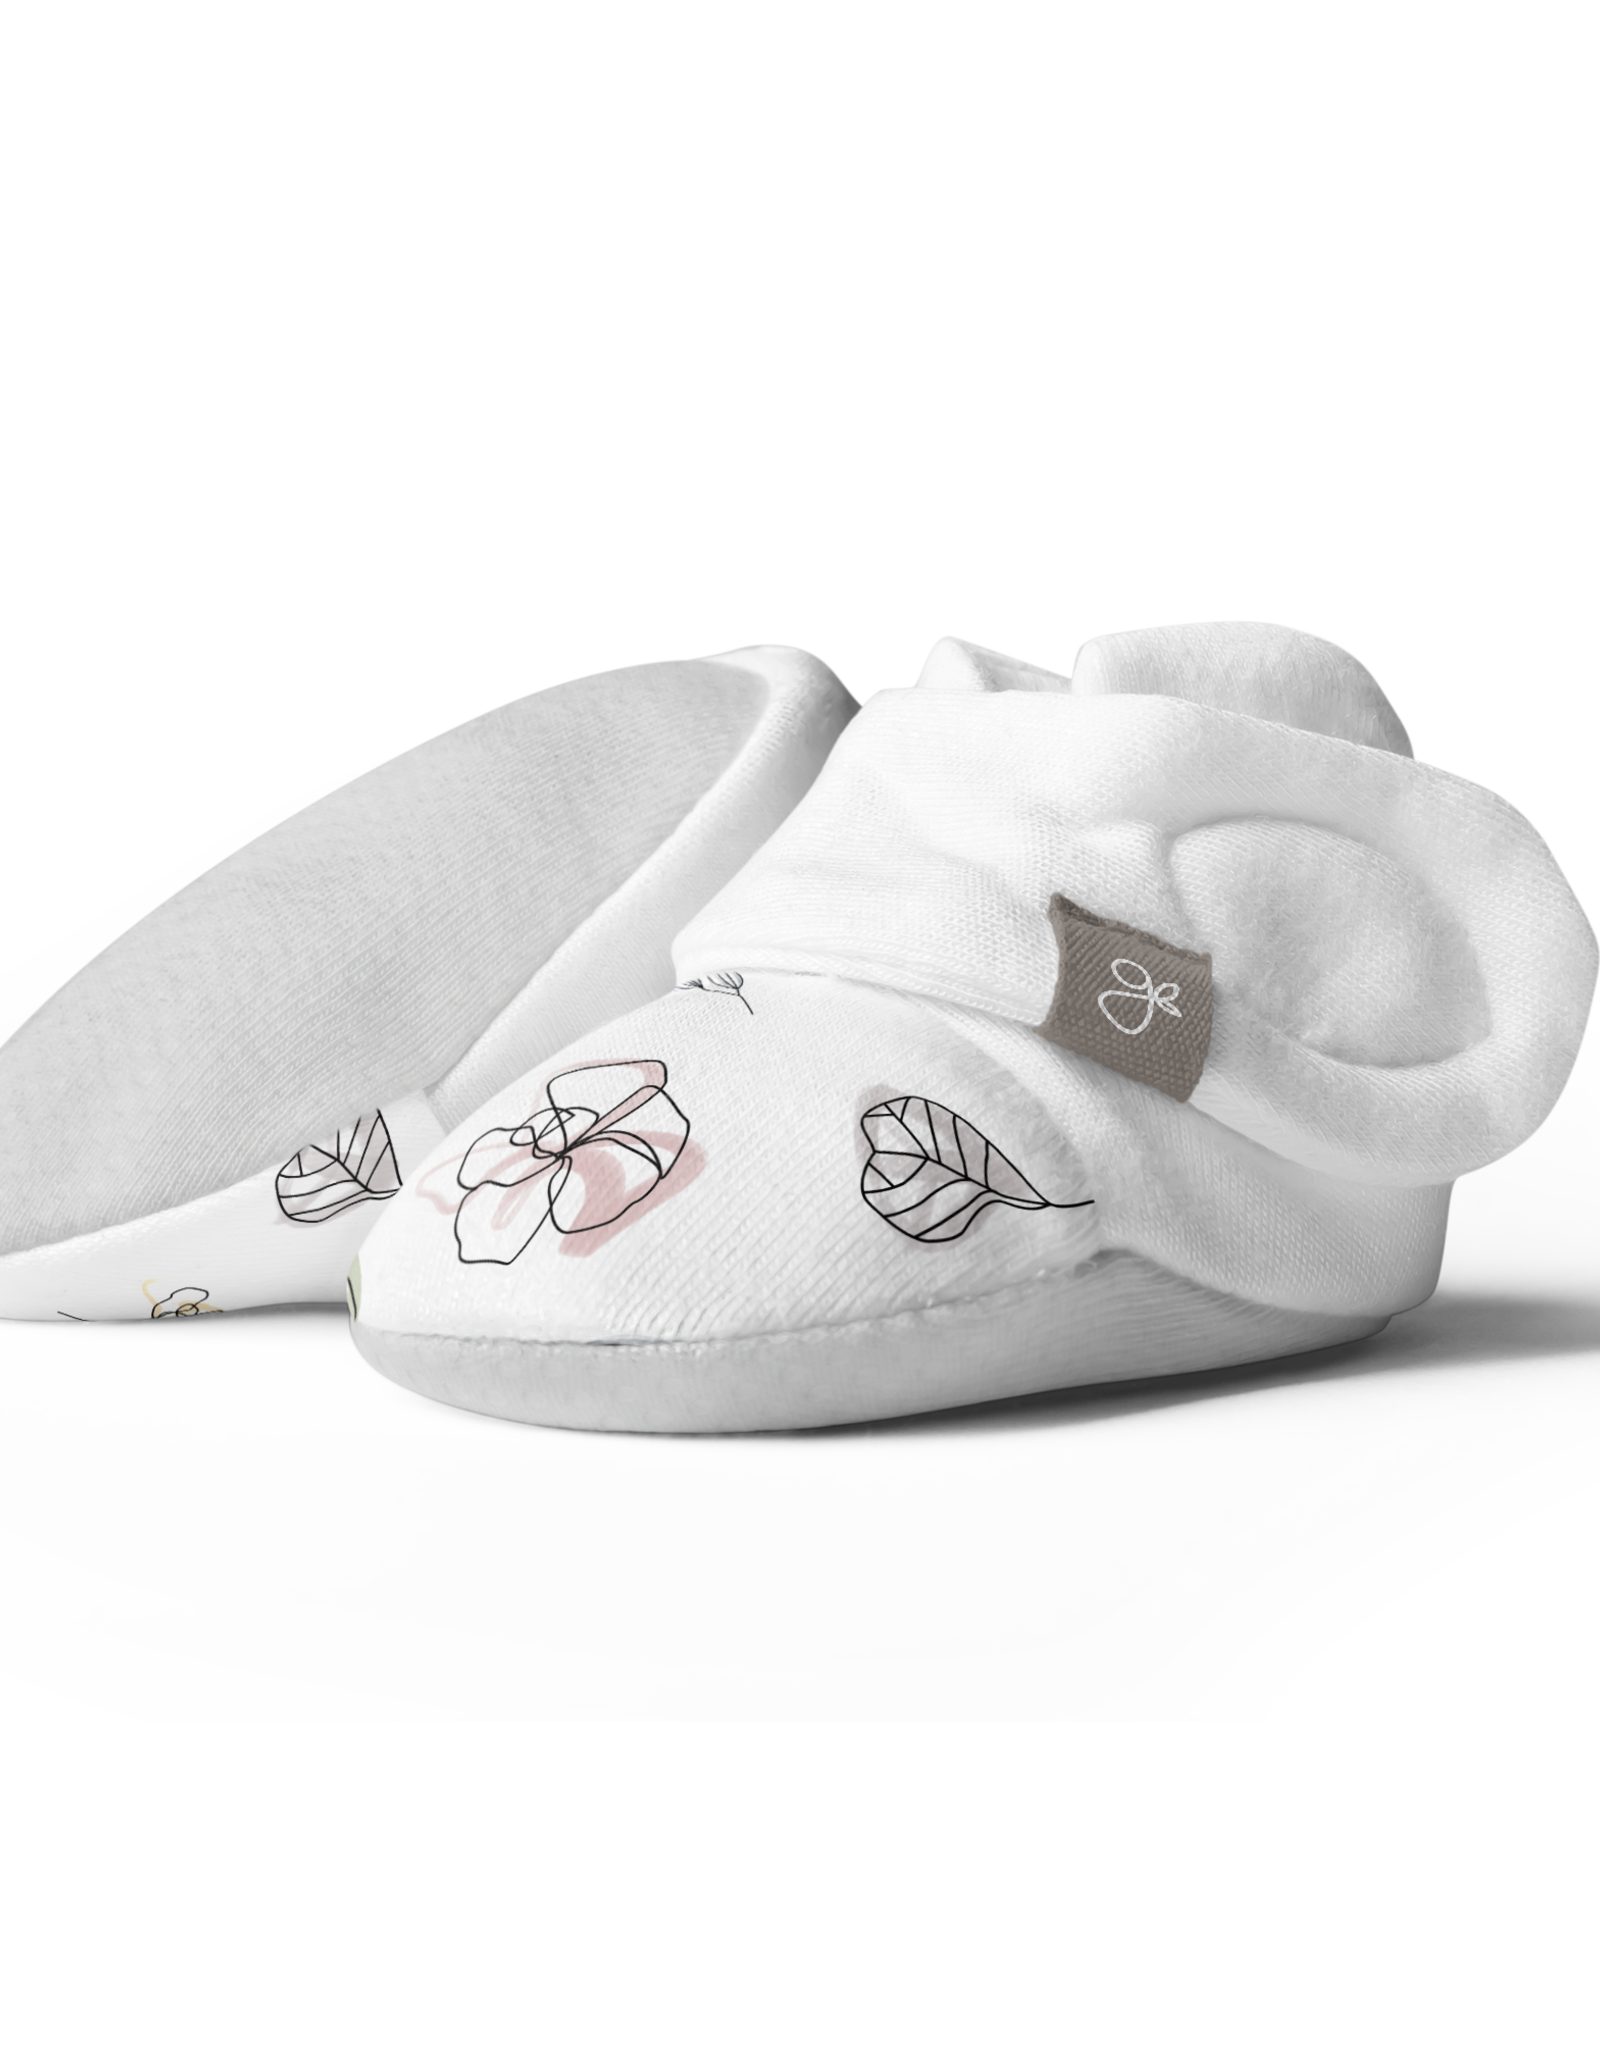 goumikids Stay-On Booties - assorted